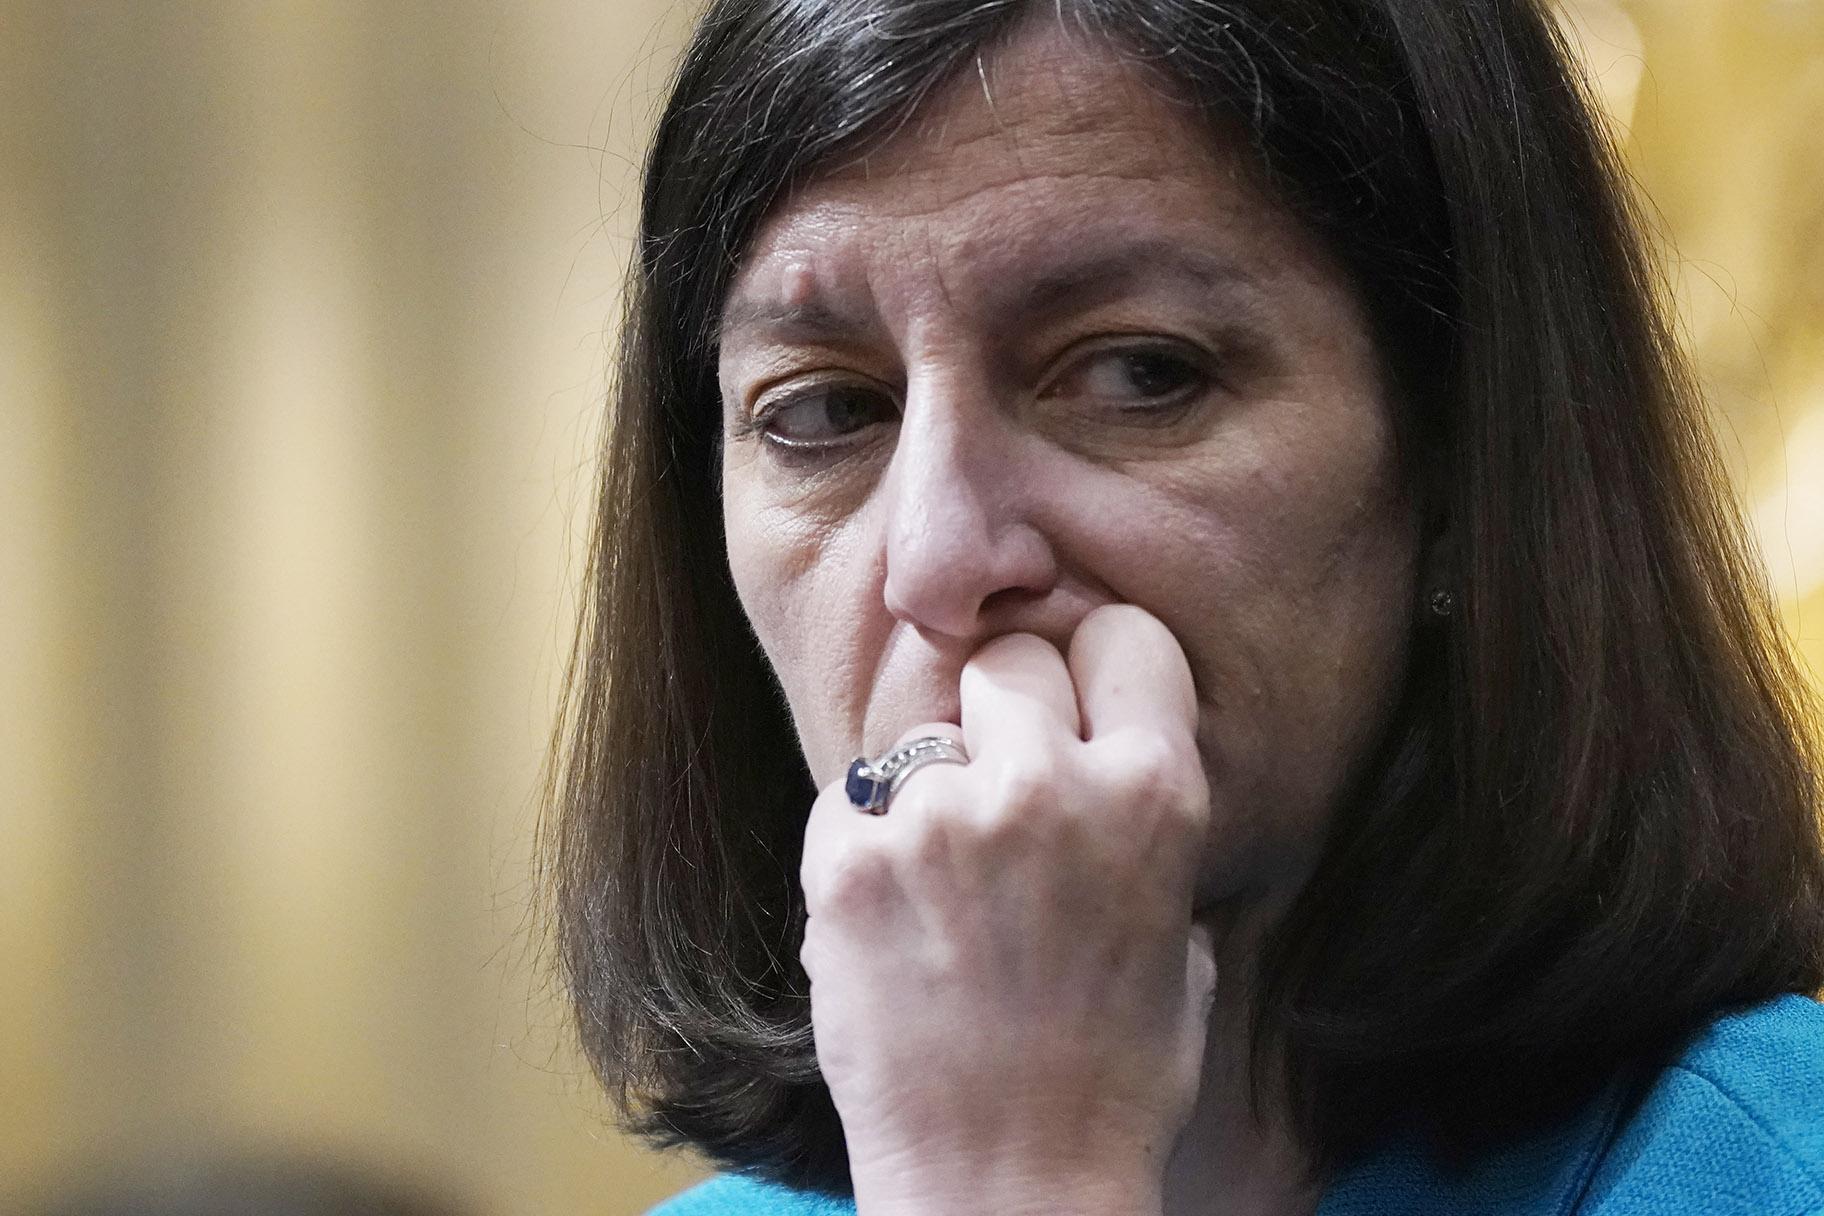 Rep. Elaine Luria, D-Va., listens as the House select committee investigating the Jan. 6, 2021, attack on the Capitol holds a hearing at the Capitol in Washington, June 16, 2022. (AP Photo / J. Scott Applewhite, File)